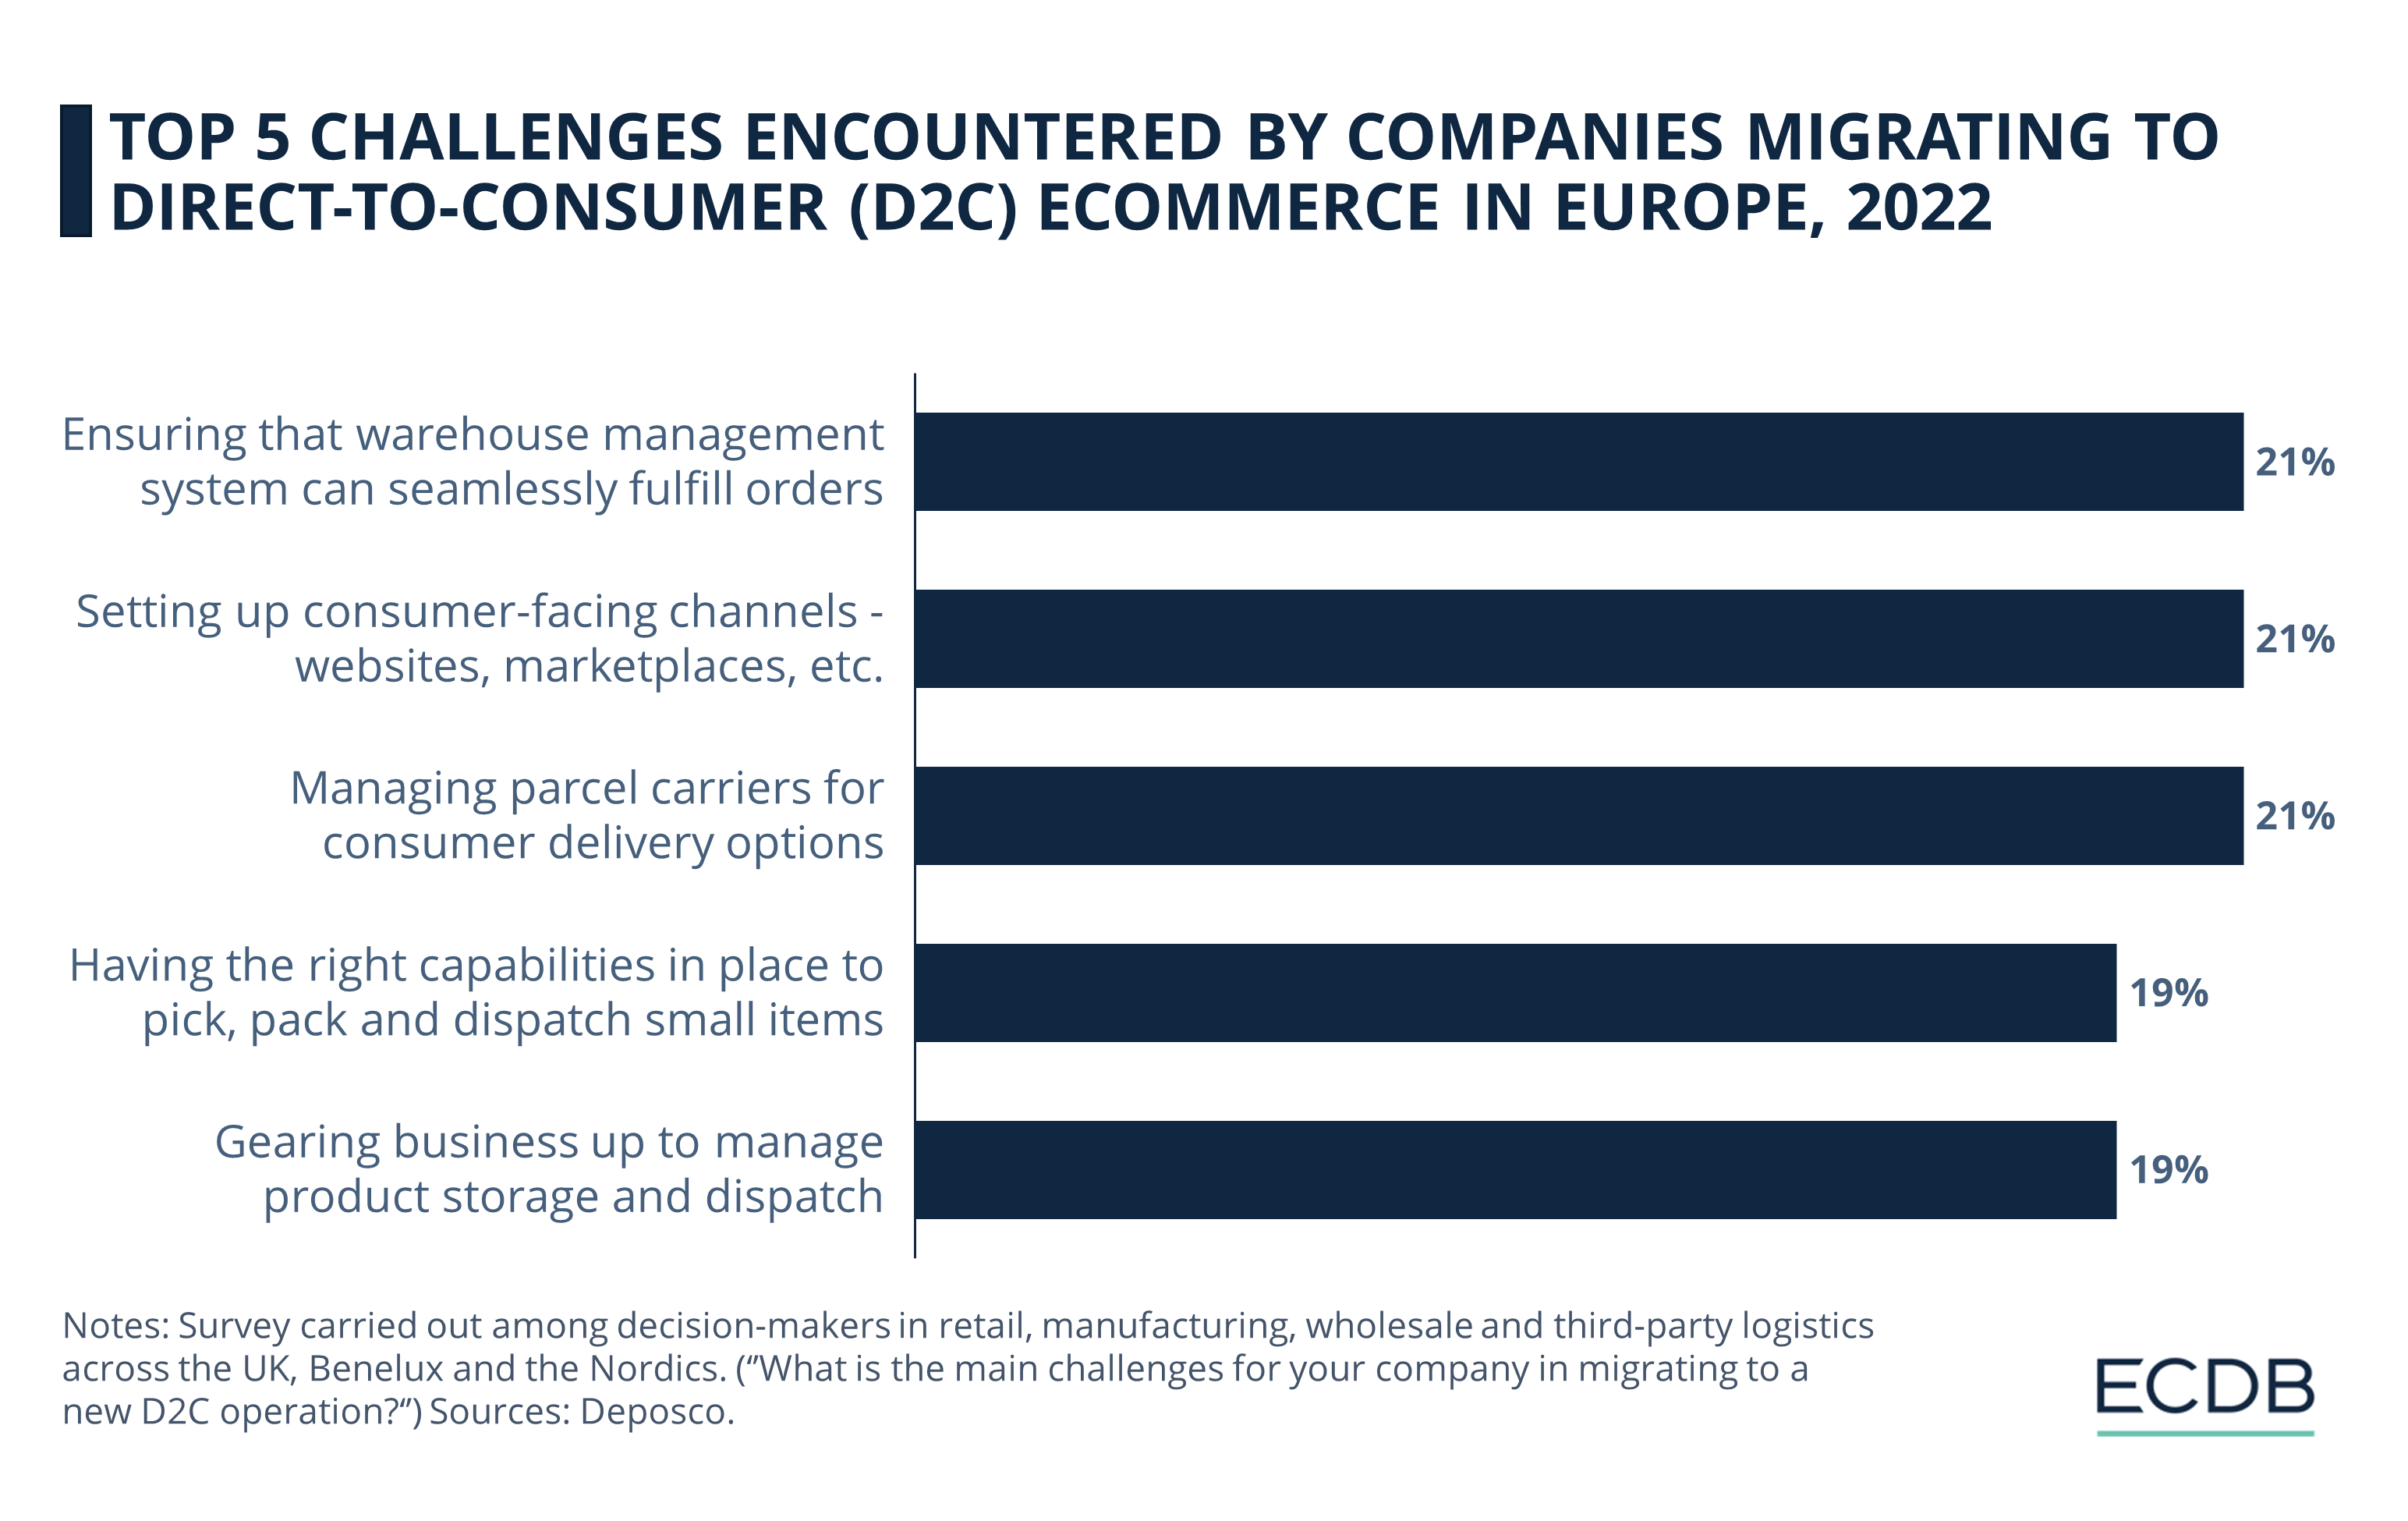 Top 5 Challenges Encountered by Companies Migrating to Direct-to-Consumer (D2C) eCommerce in Europe, 2022